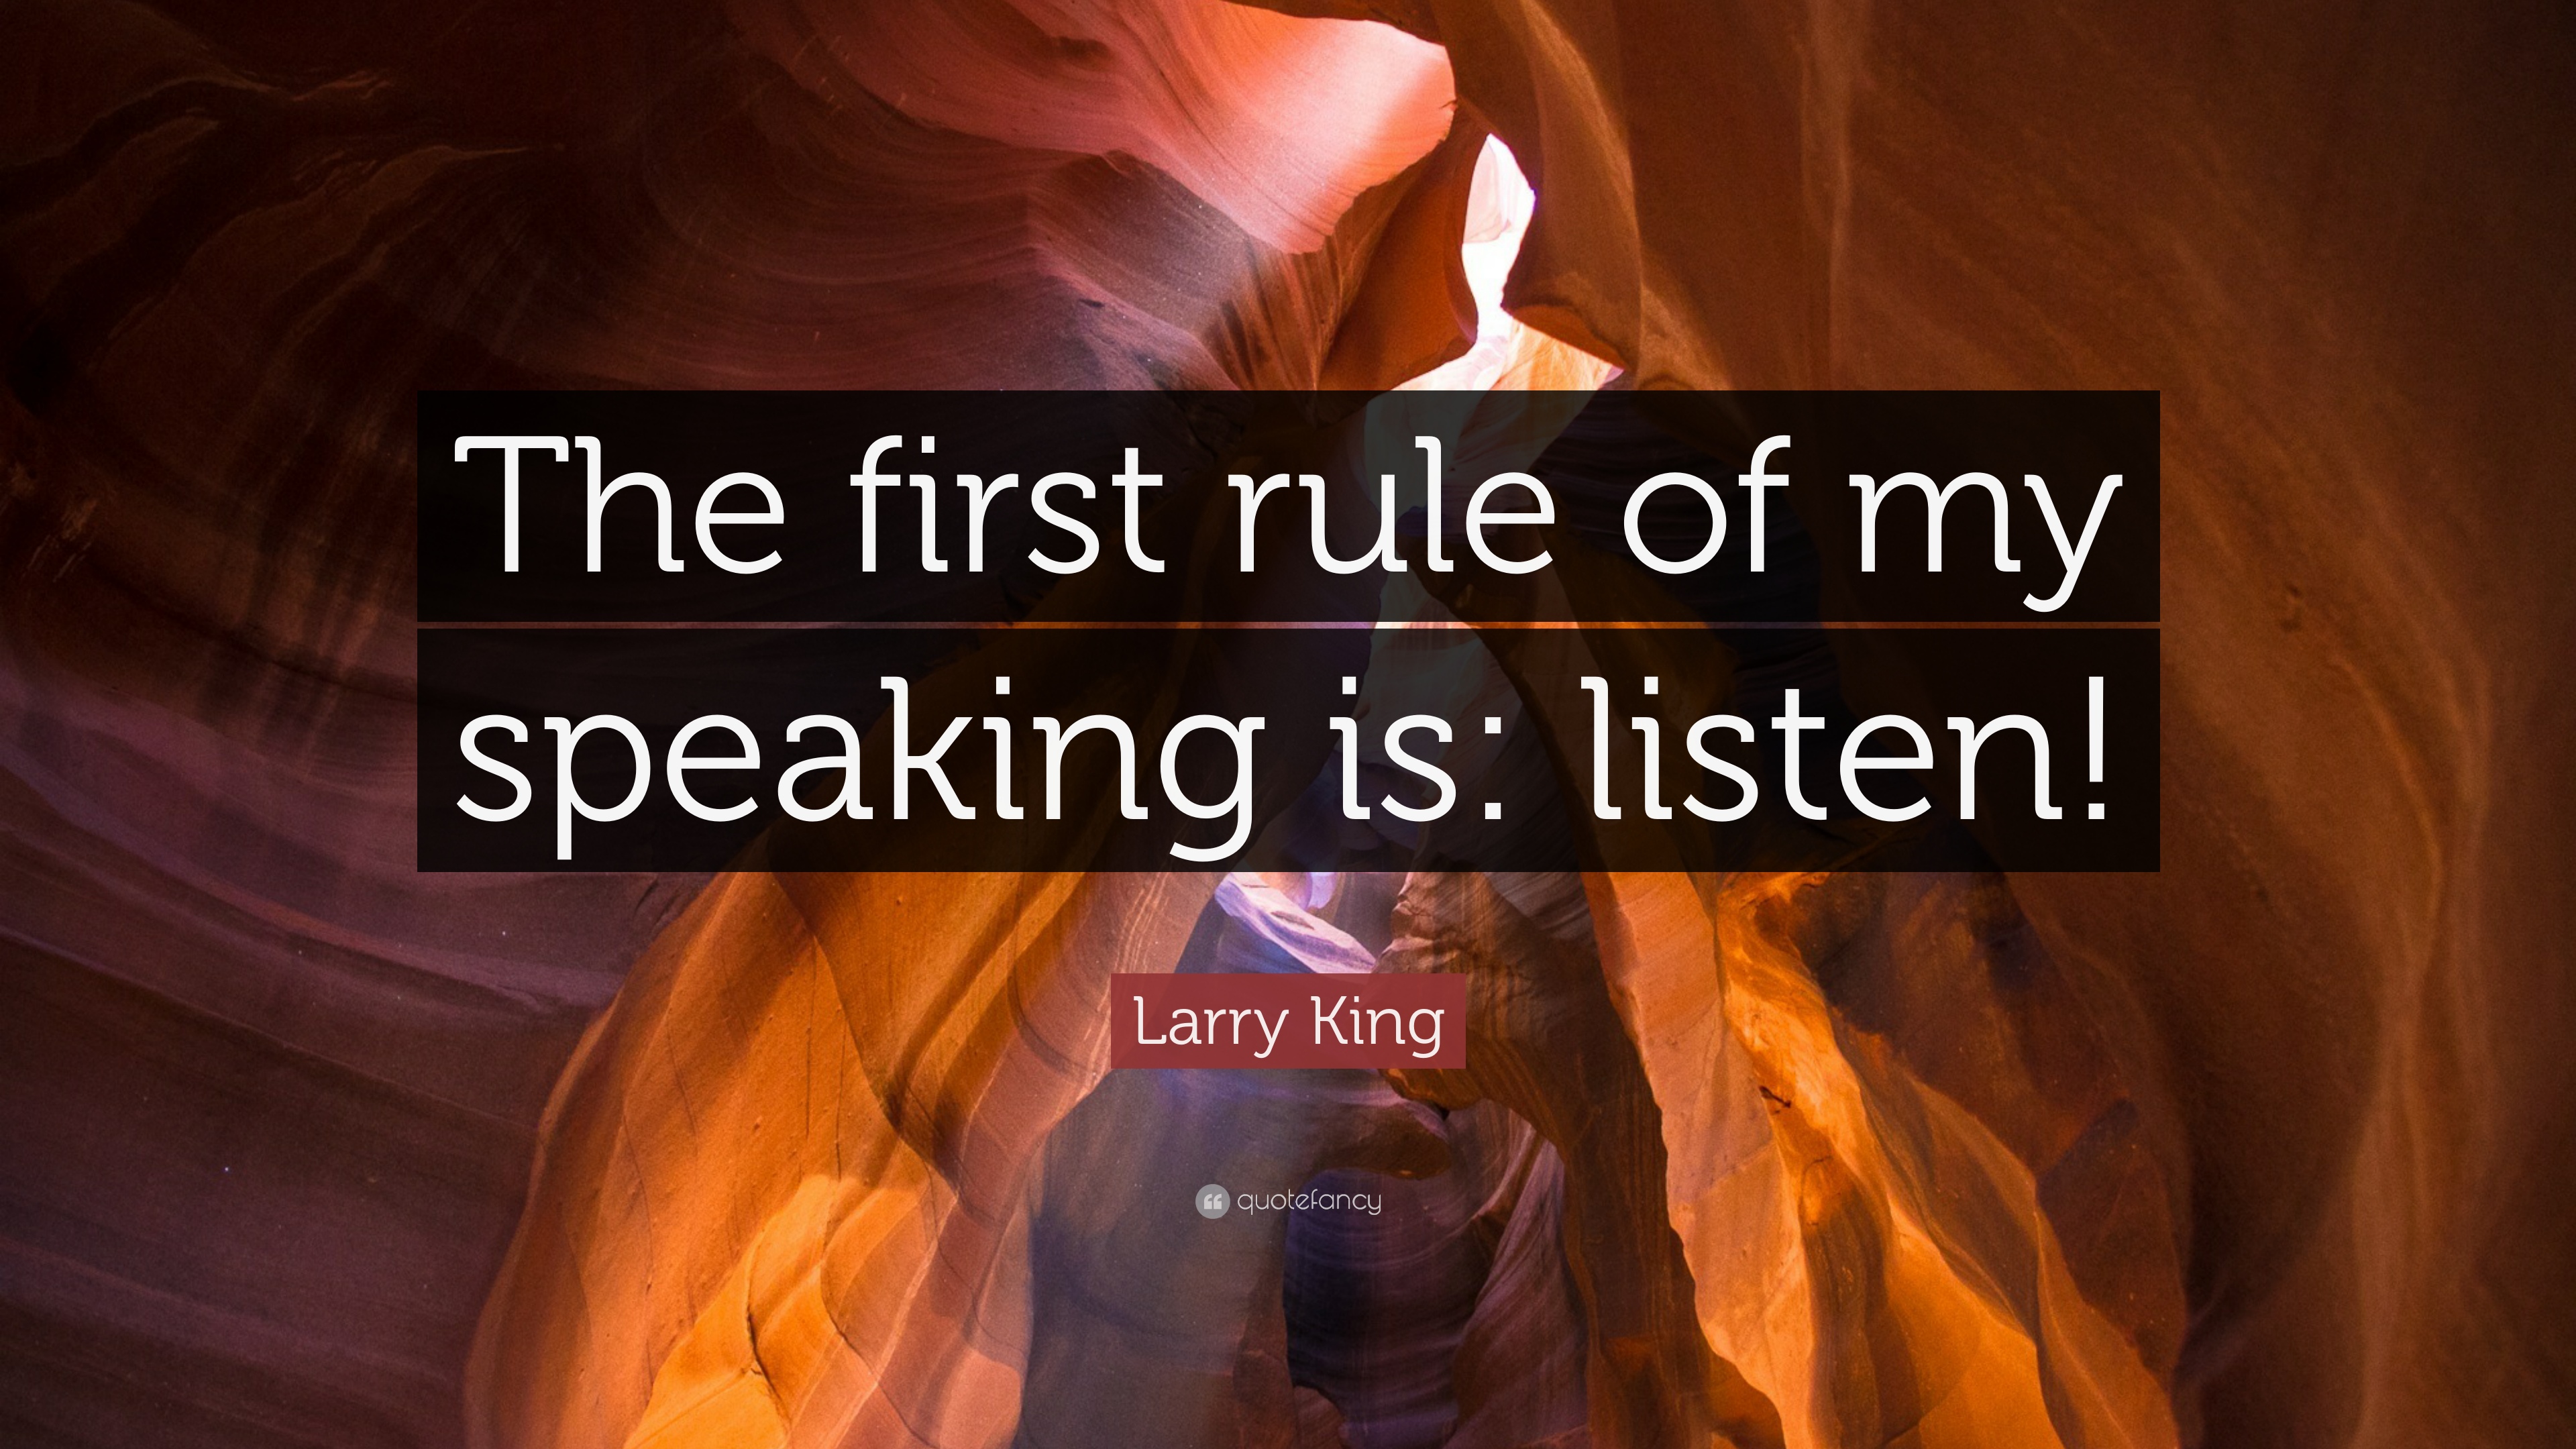 Larry King Quote: “The first rule of my speaking is: listen!” 9